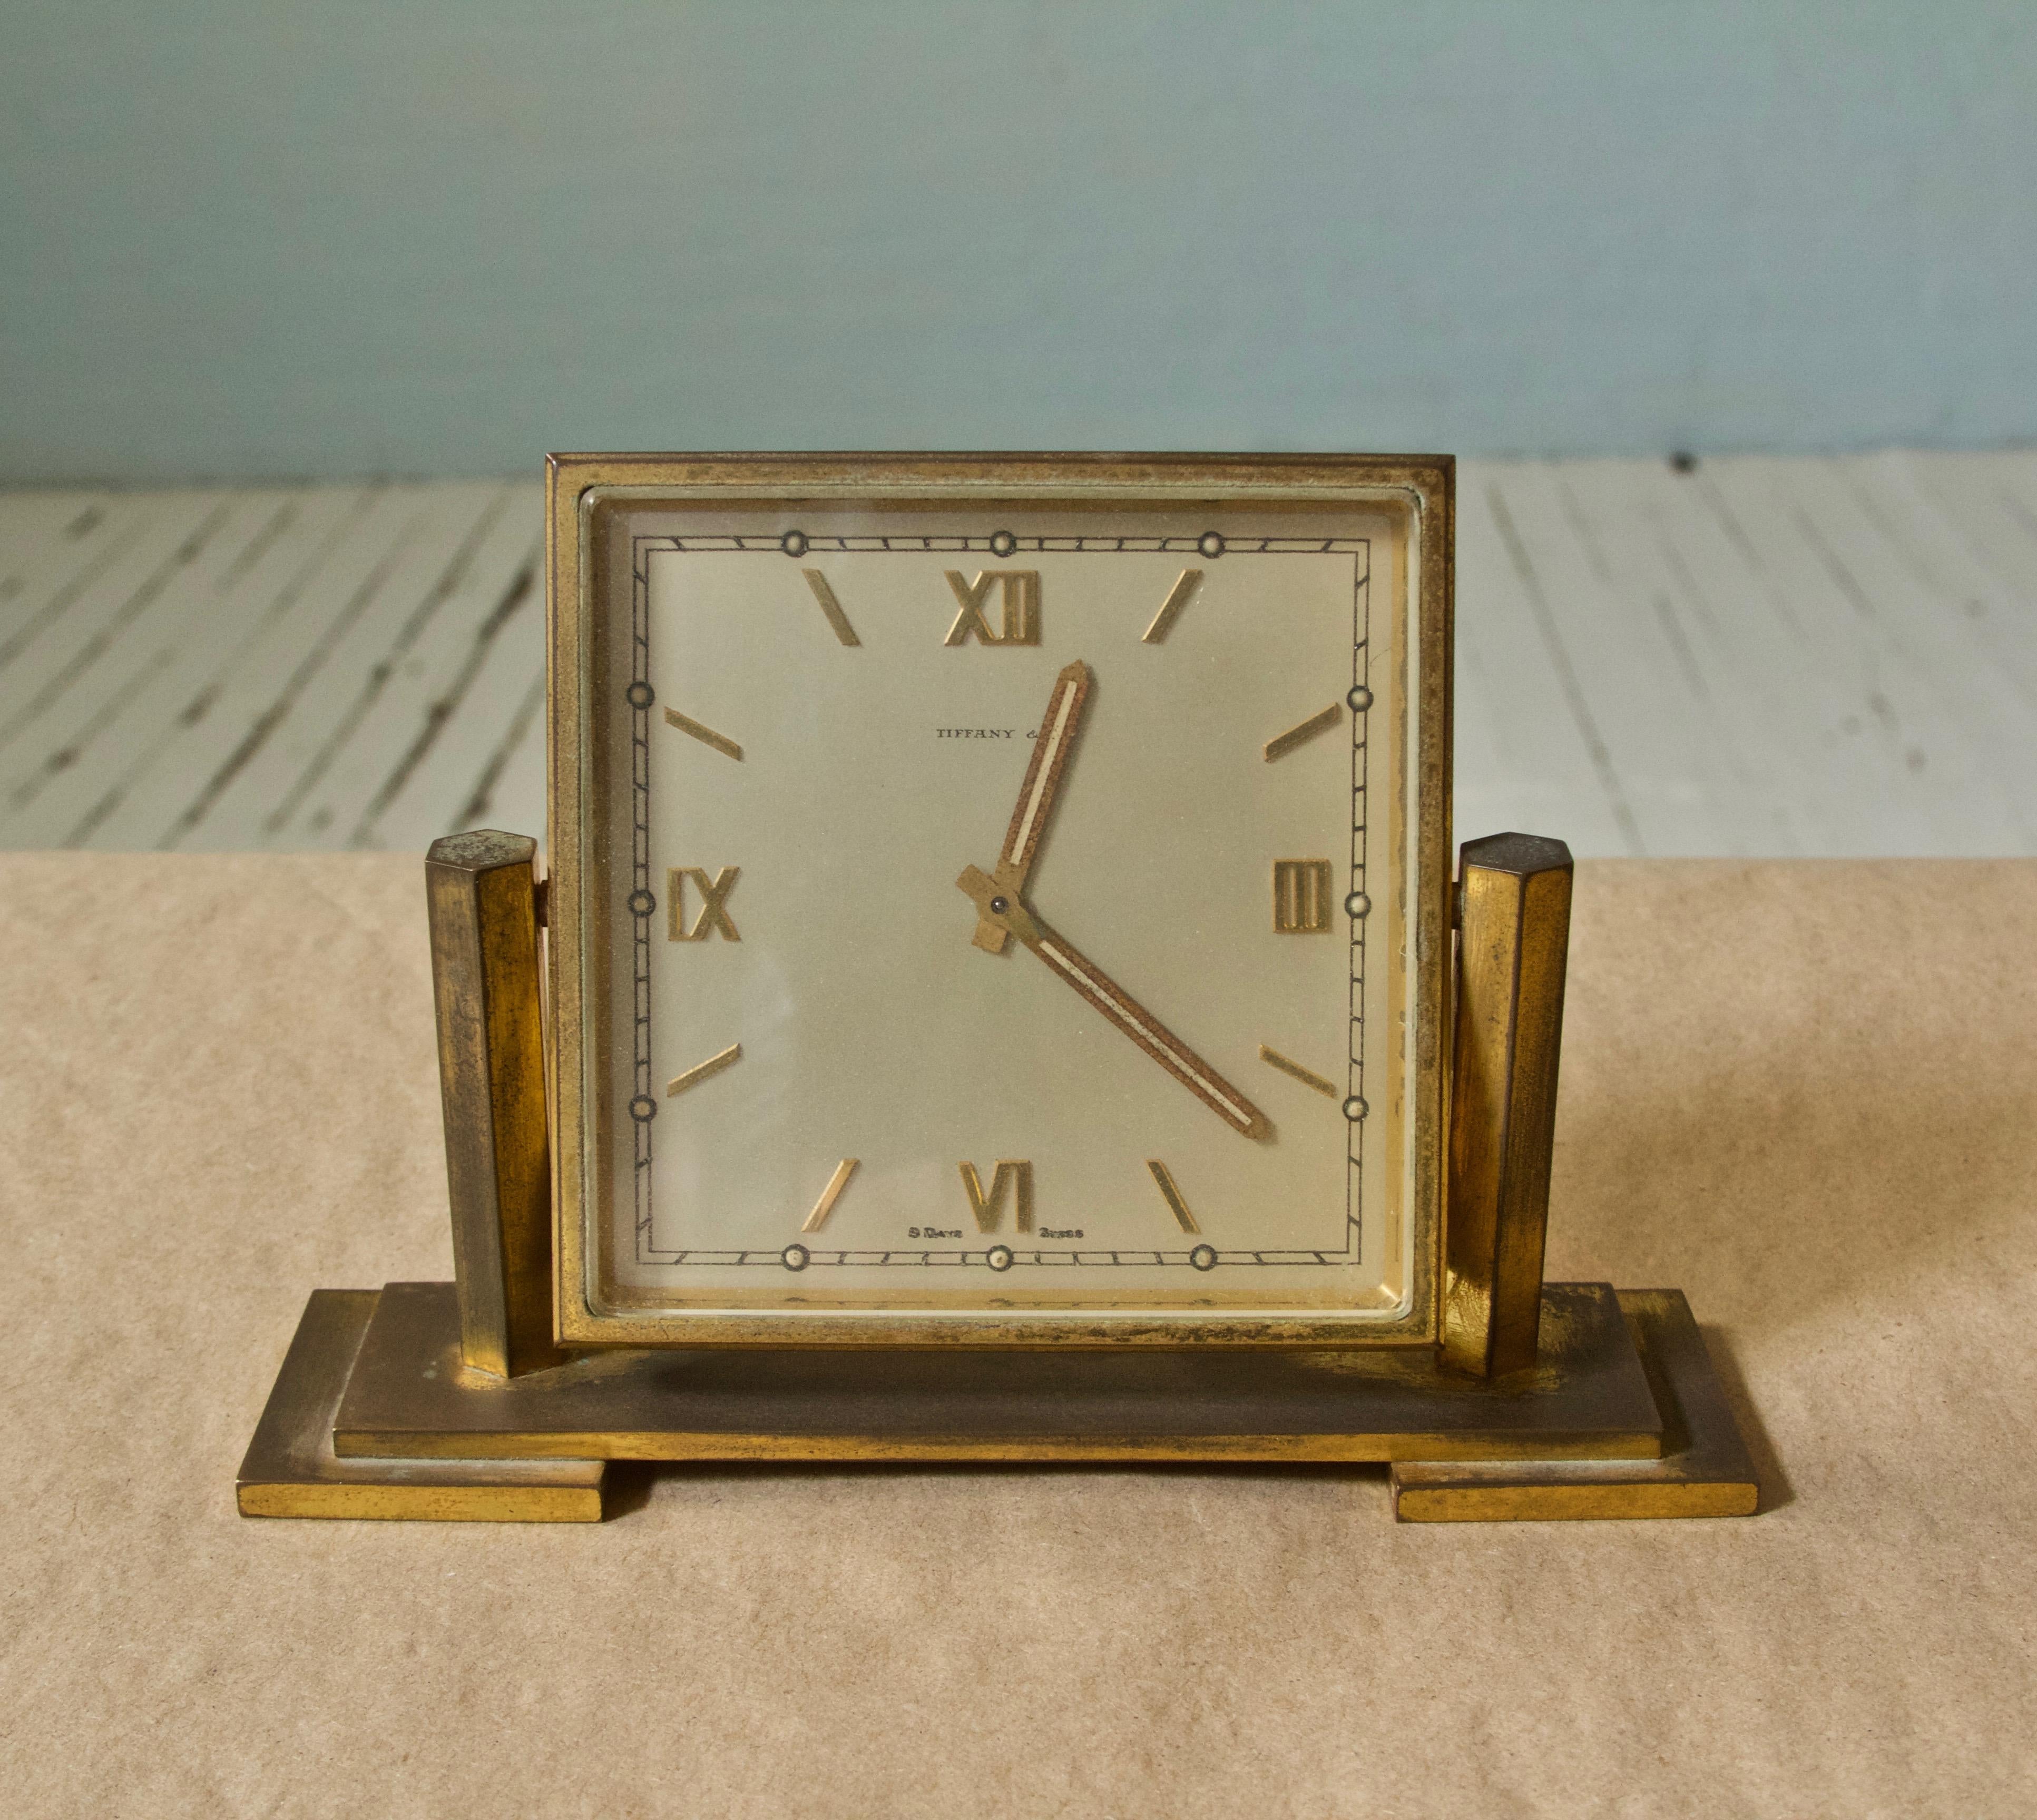 Handsome 8 day, Swiss jeweled Tiffany and Co. square desk clock in patinated brass with stepped dial frame and two-tiered base. Face pivots between flanking hexagonal columns for adjustable clock face angles. Two clock hands and applied Roman